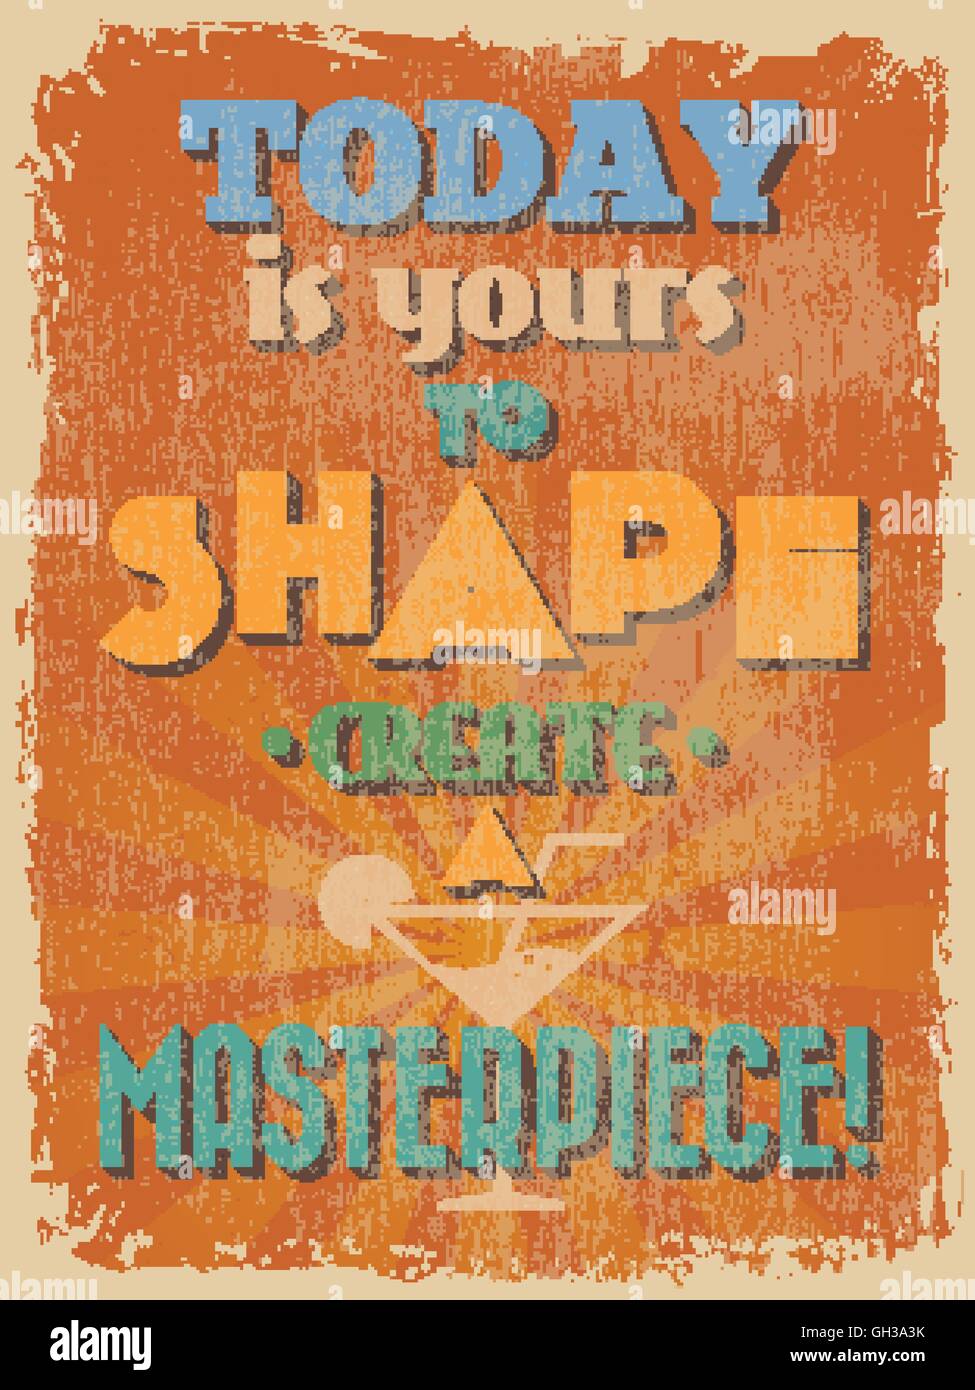 Retro Vintage Motivational Quote Poster. Today is Yours to Shape Create a Masterpiece. Vector illustration Stock Vector